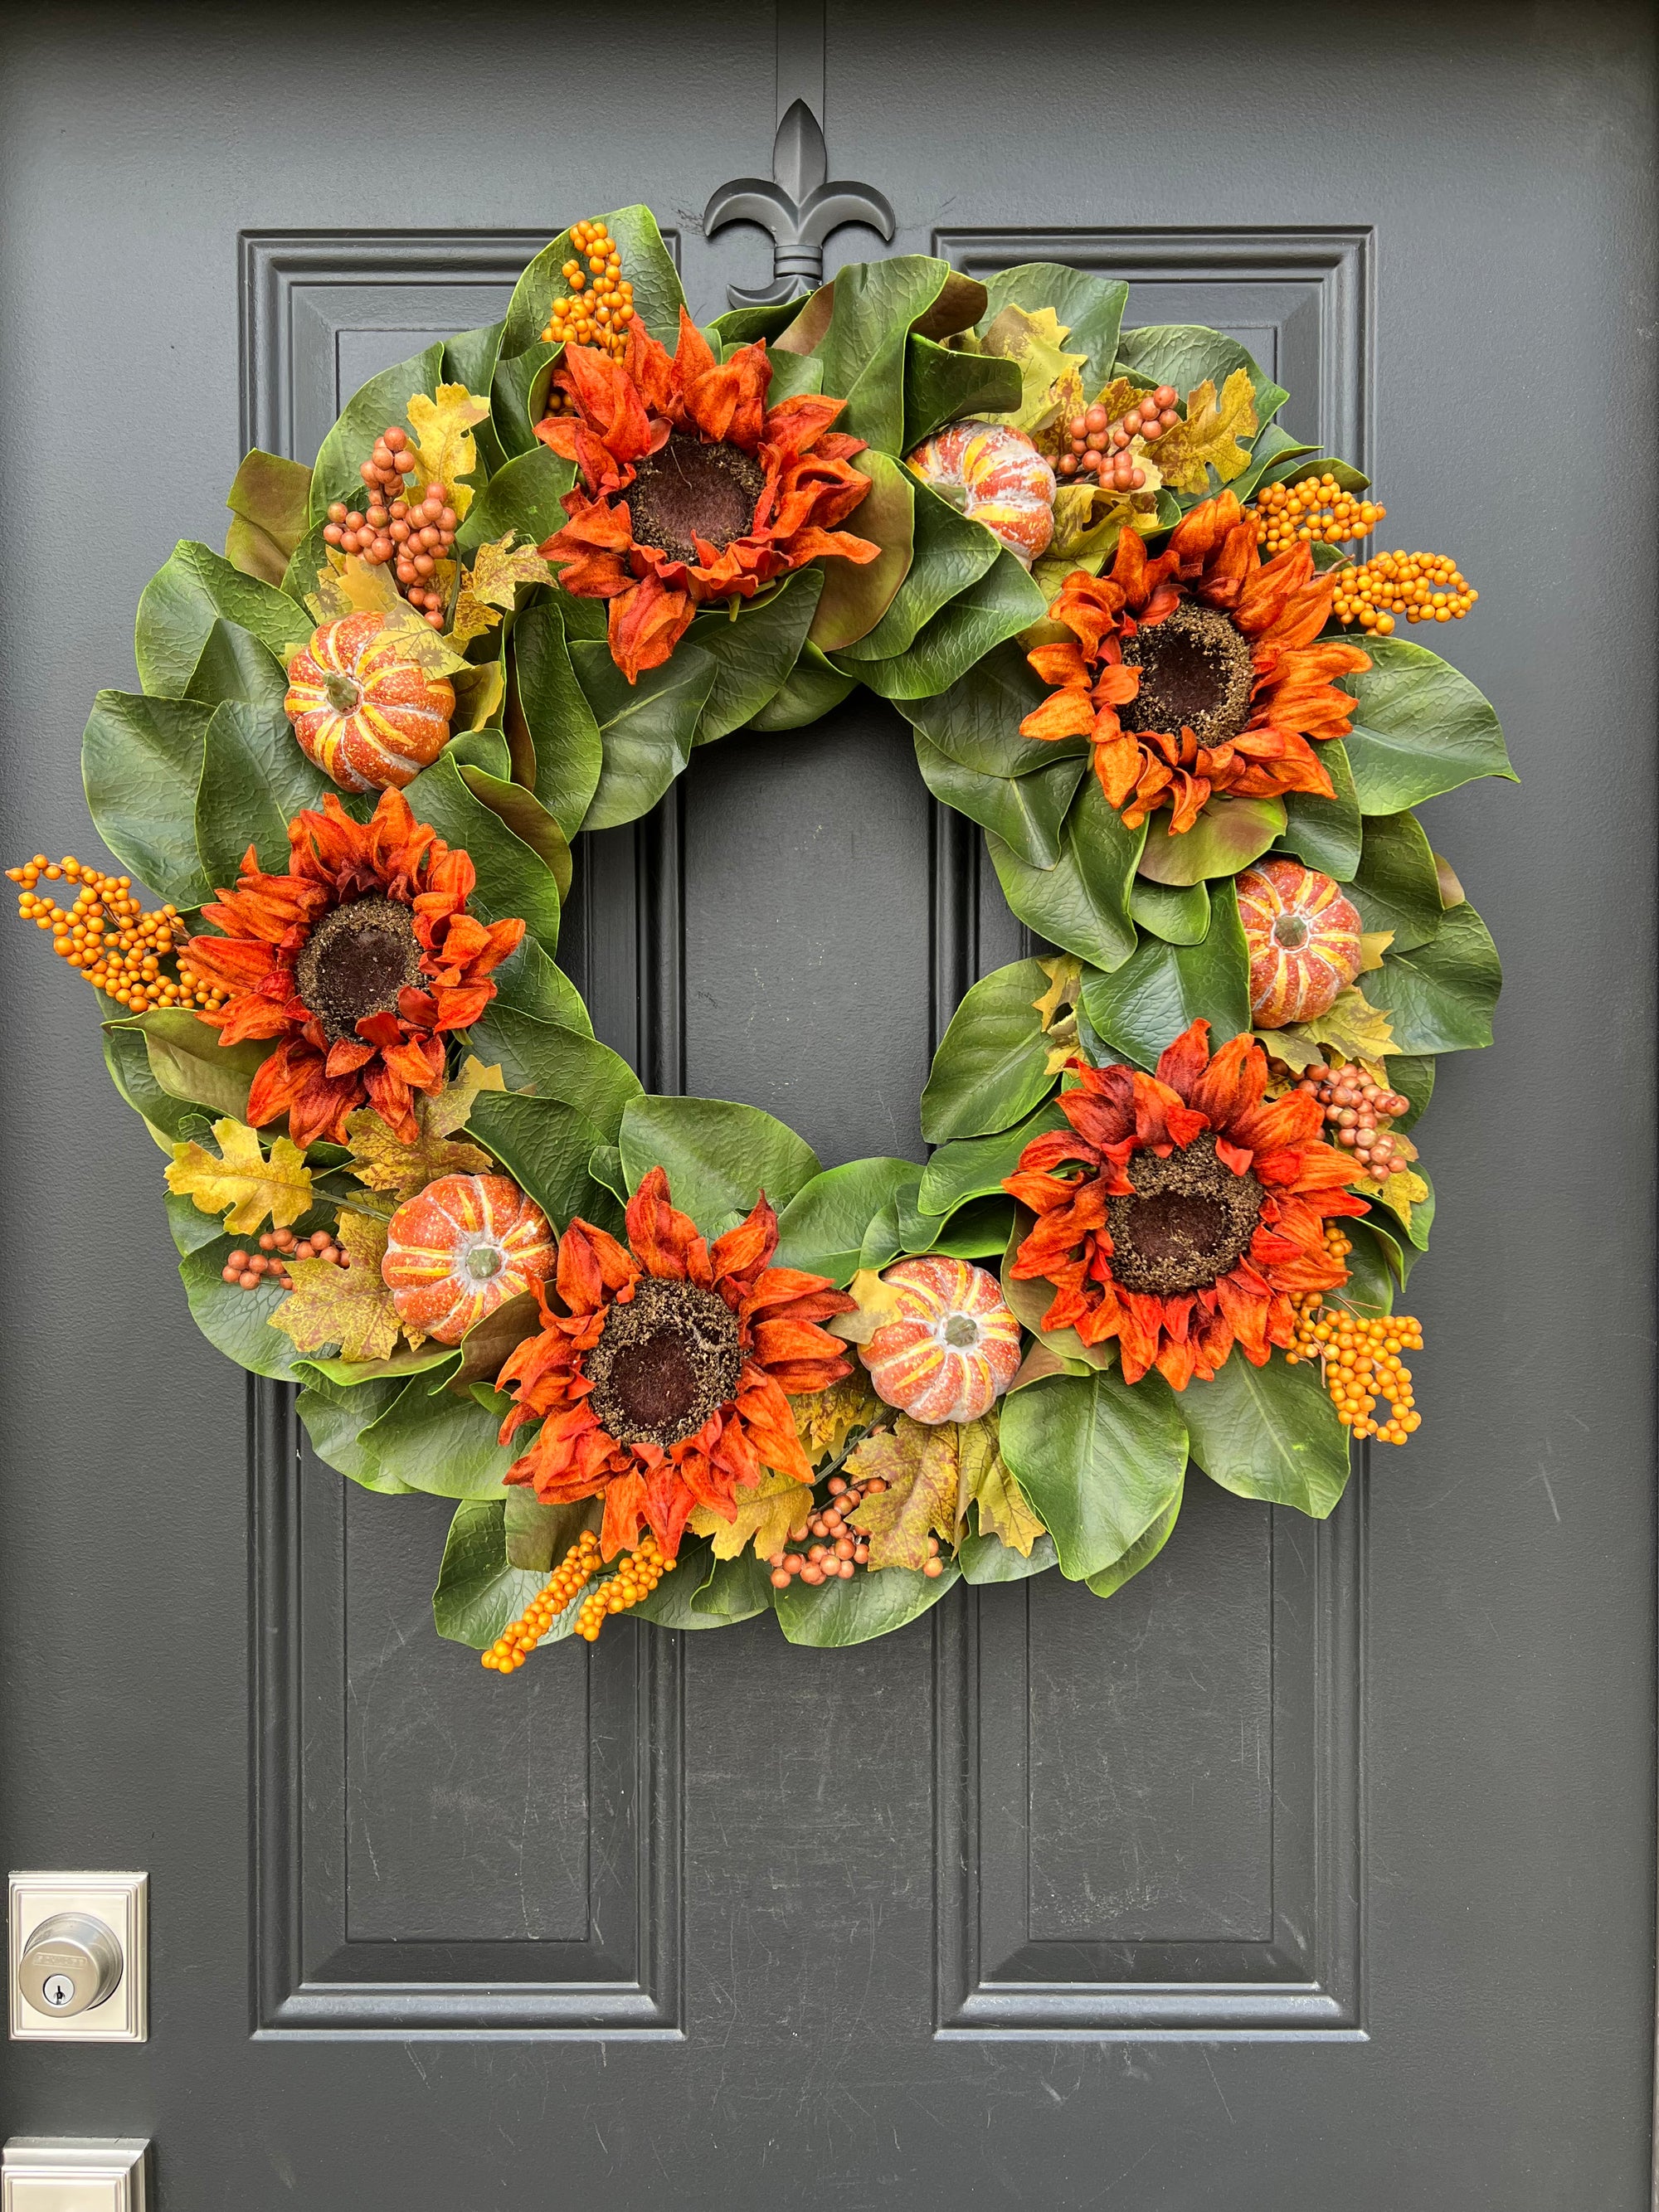 Fall Magnolia Wreath with Sunflowers and Pumpkins 24 Inches, Ready to Ship